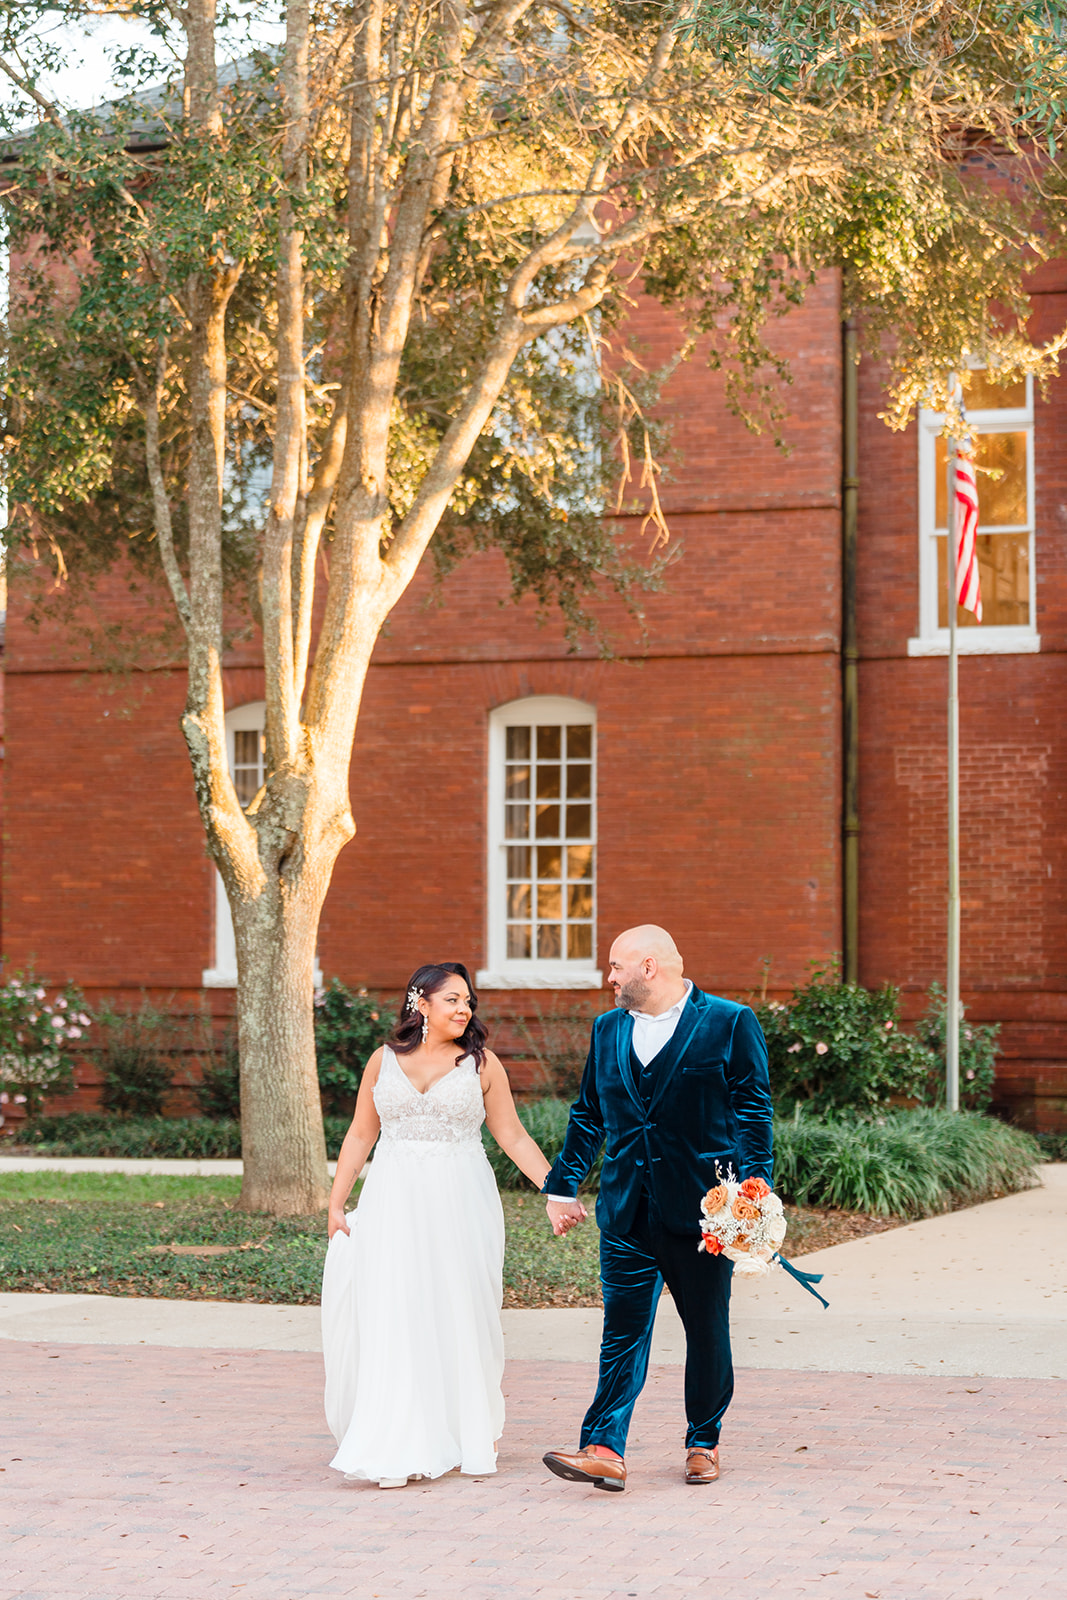 Margaux and Alberto walking together, holding hands and gazing into each other's eyes outside the front of Venue 1902, captured by Jerzy Nieves Photography.